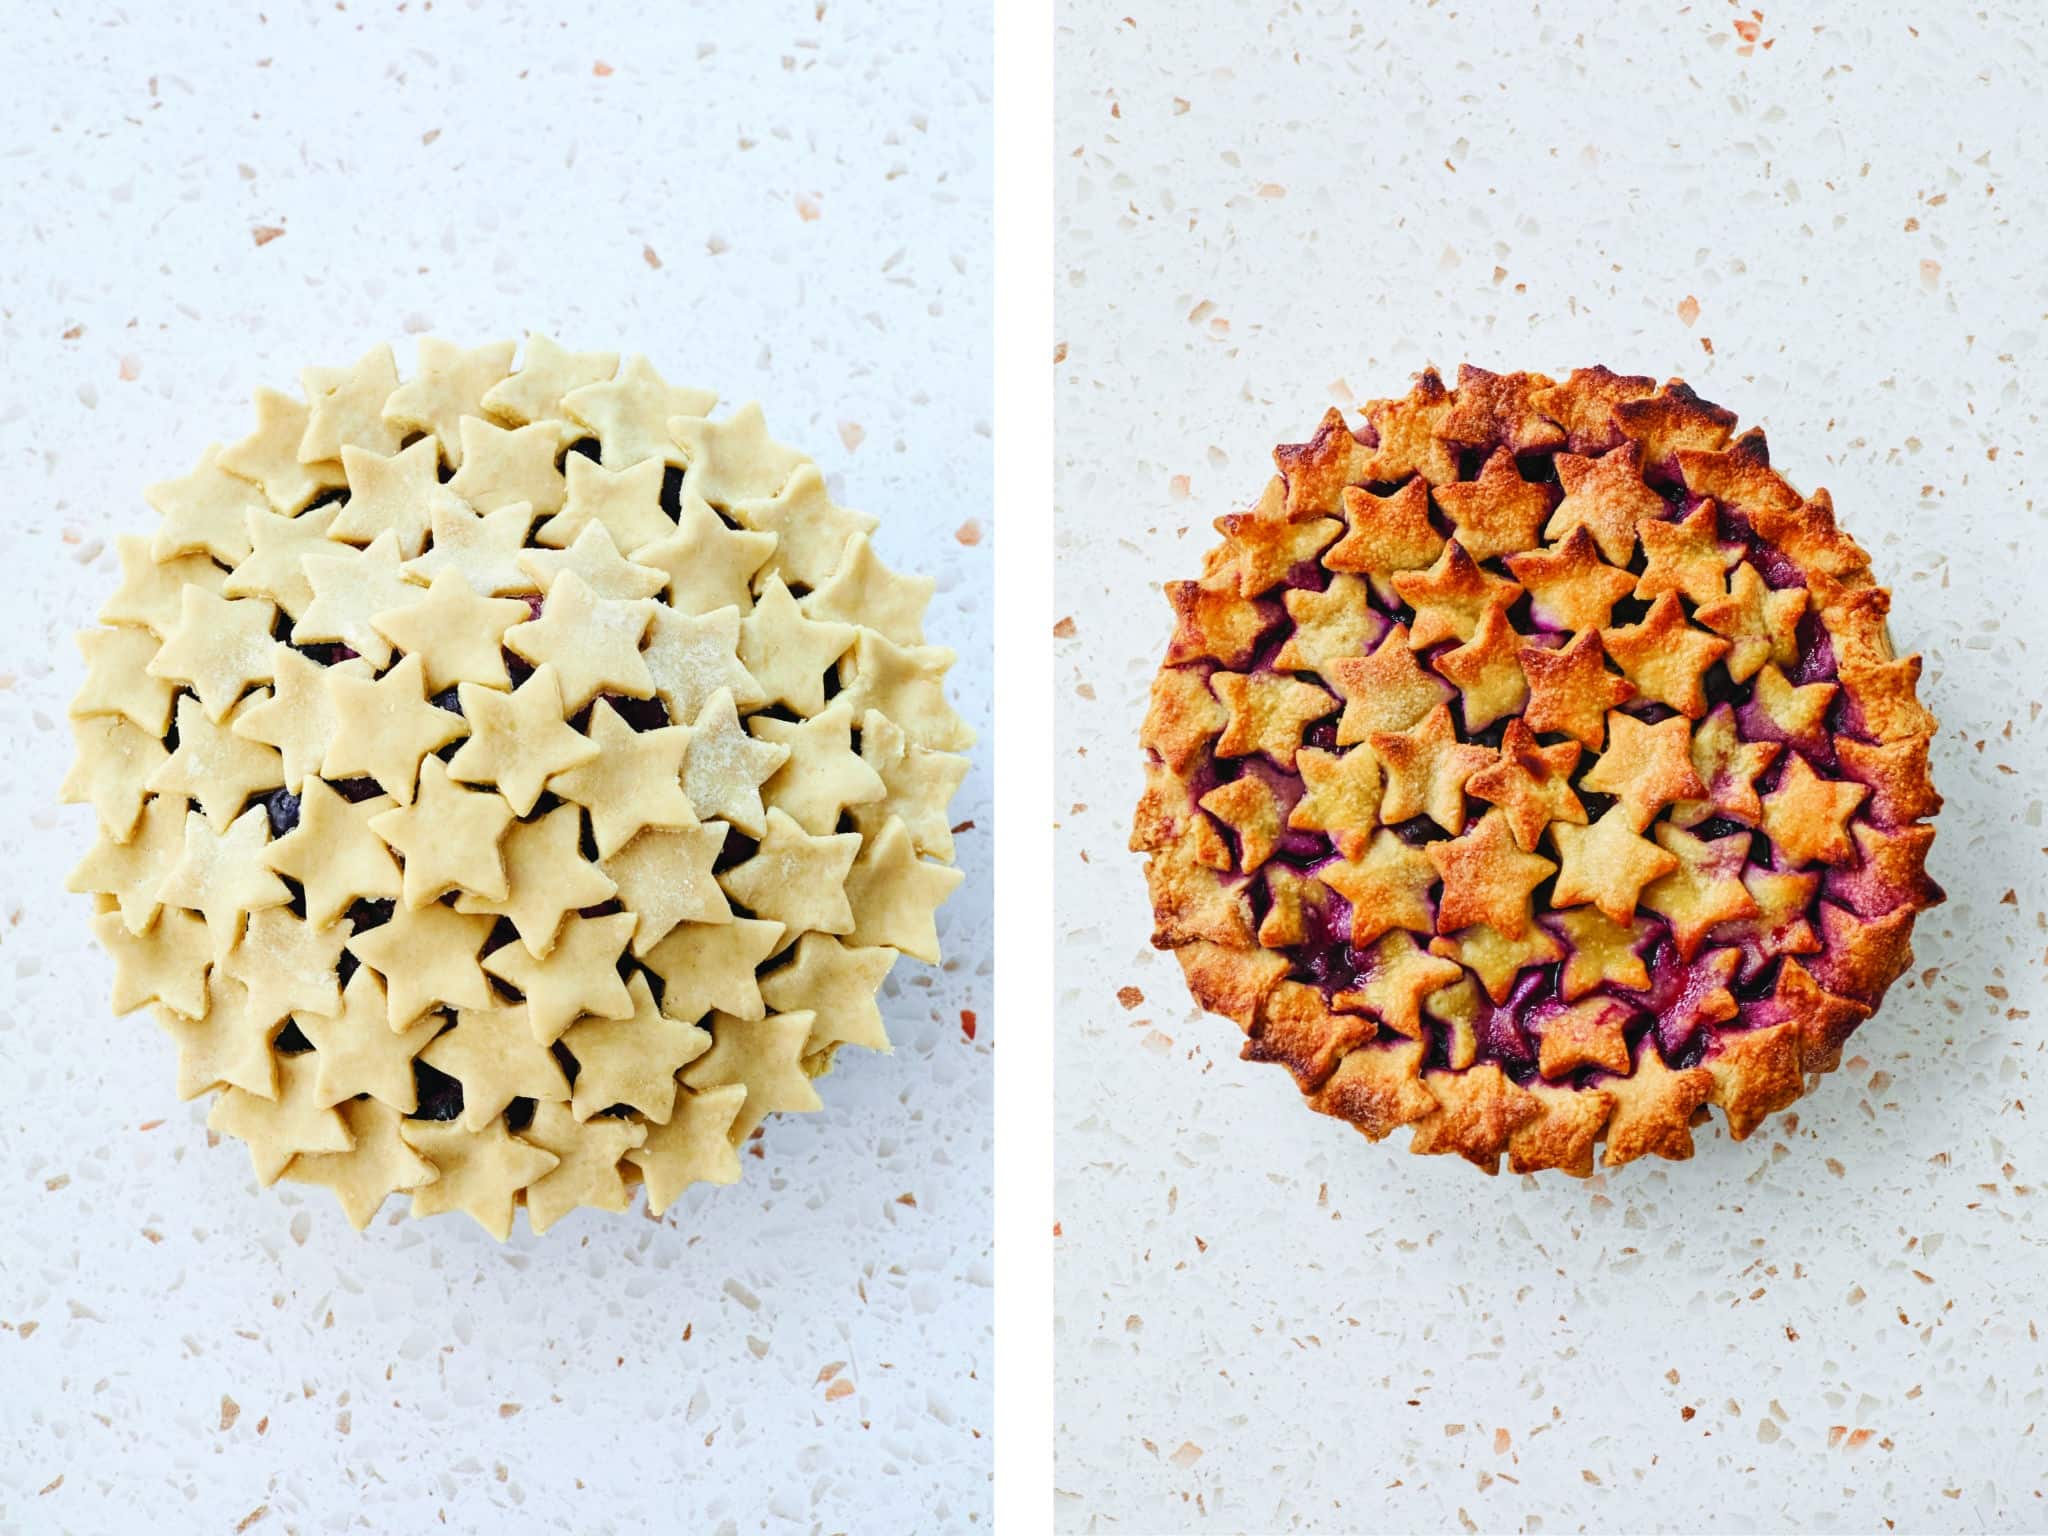 Before and after baking a pie with star cutouts.